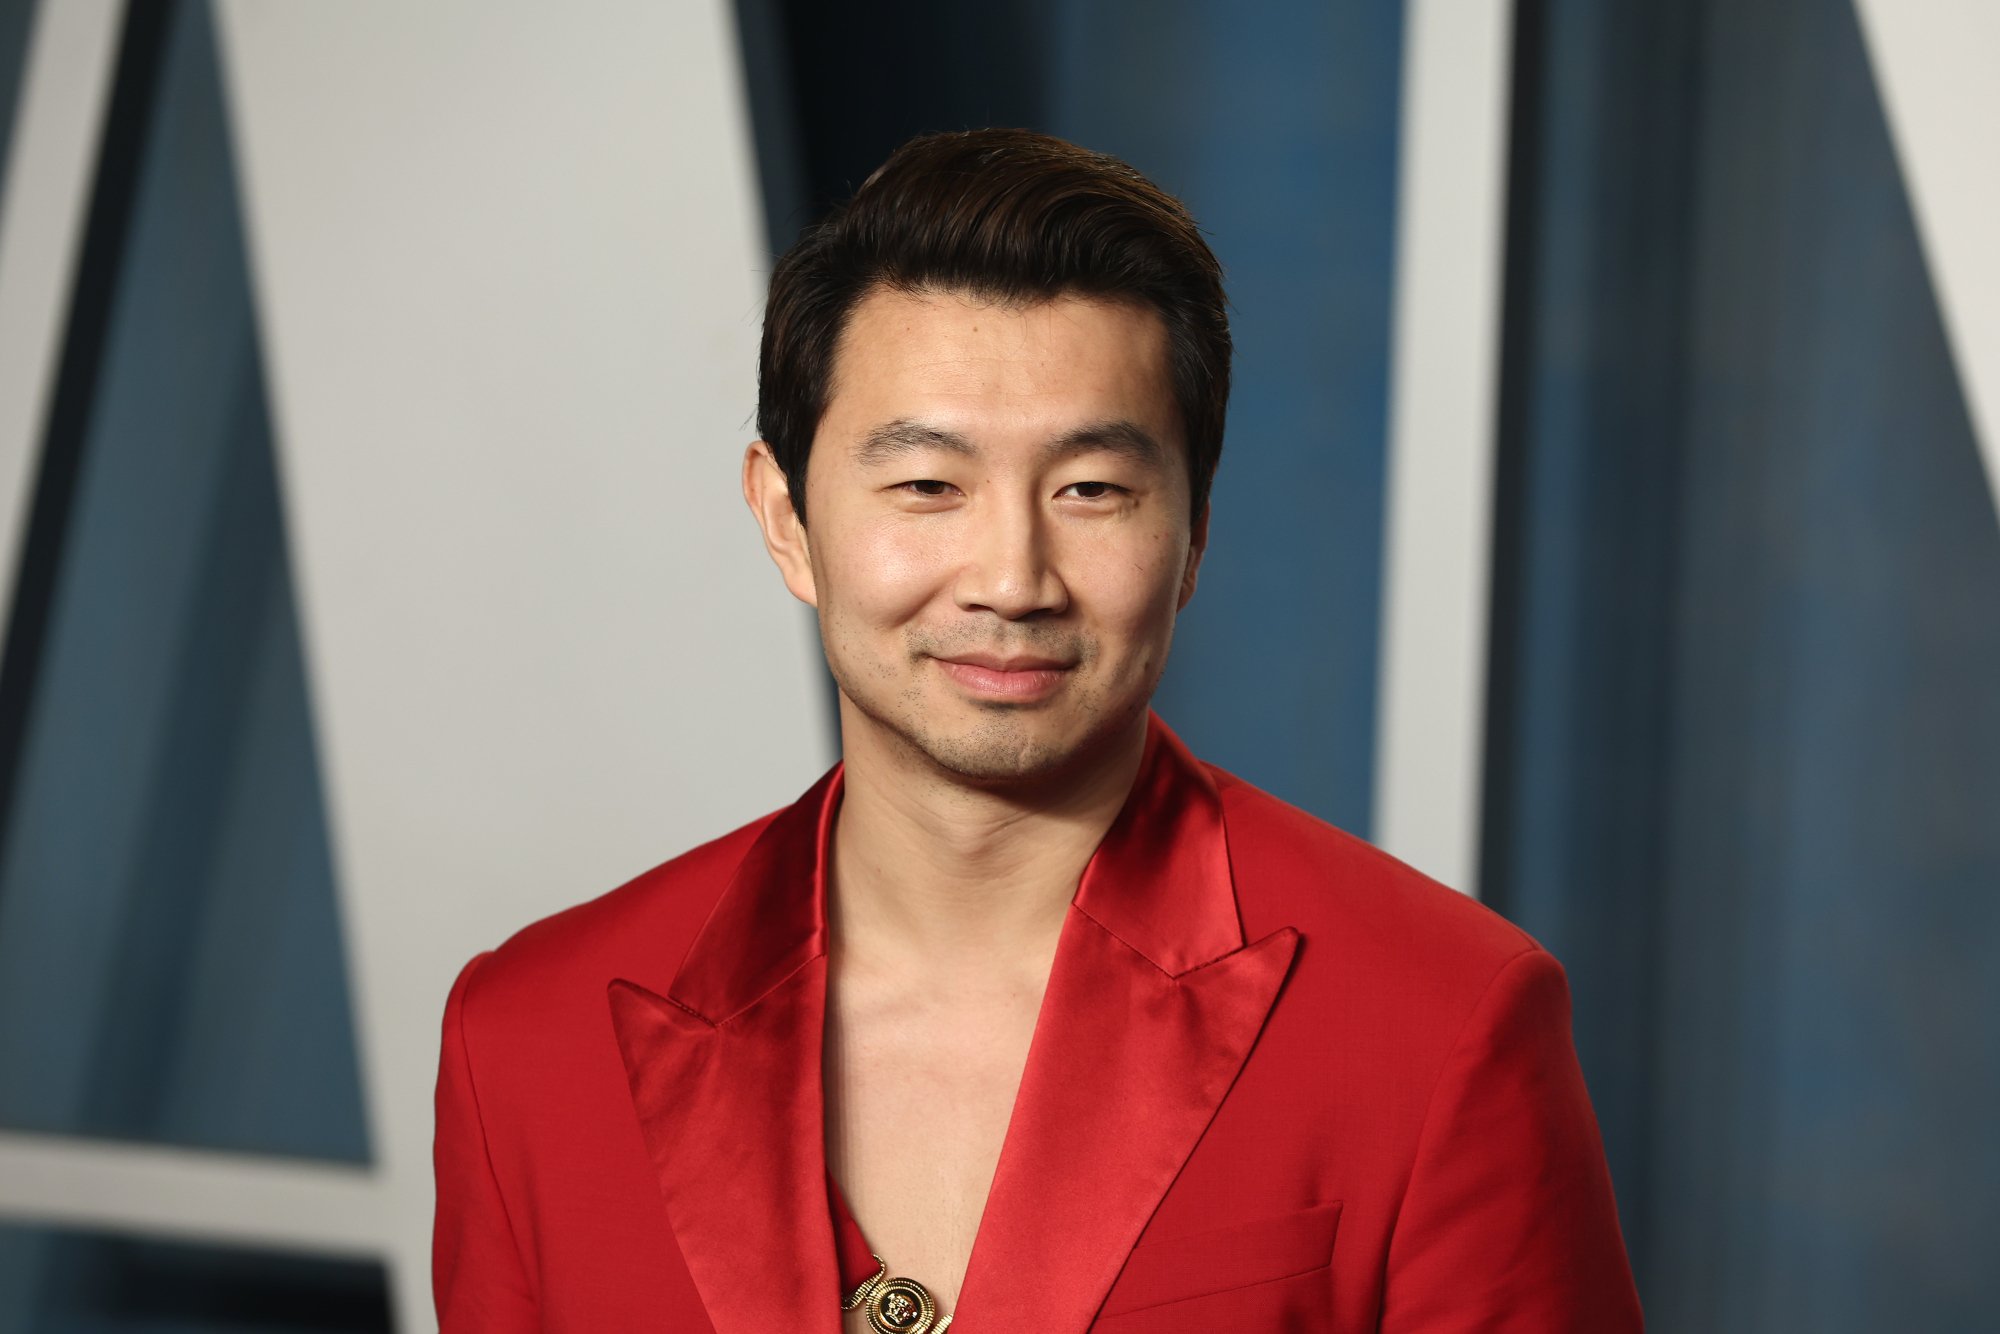 'Barbie' actor Simu Liu wearing a red suit with a slight smile